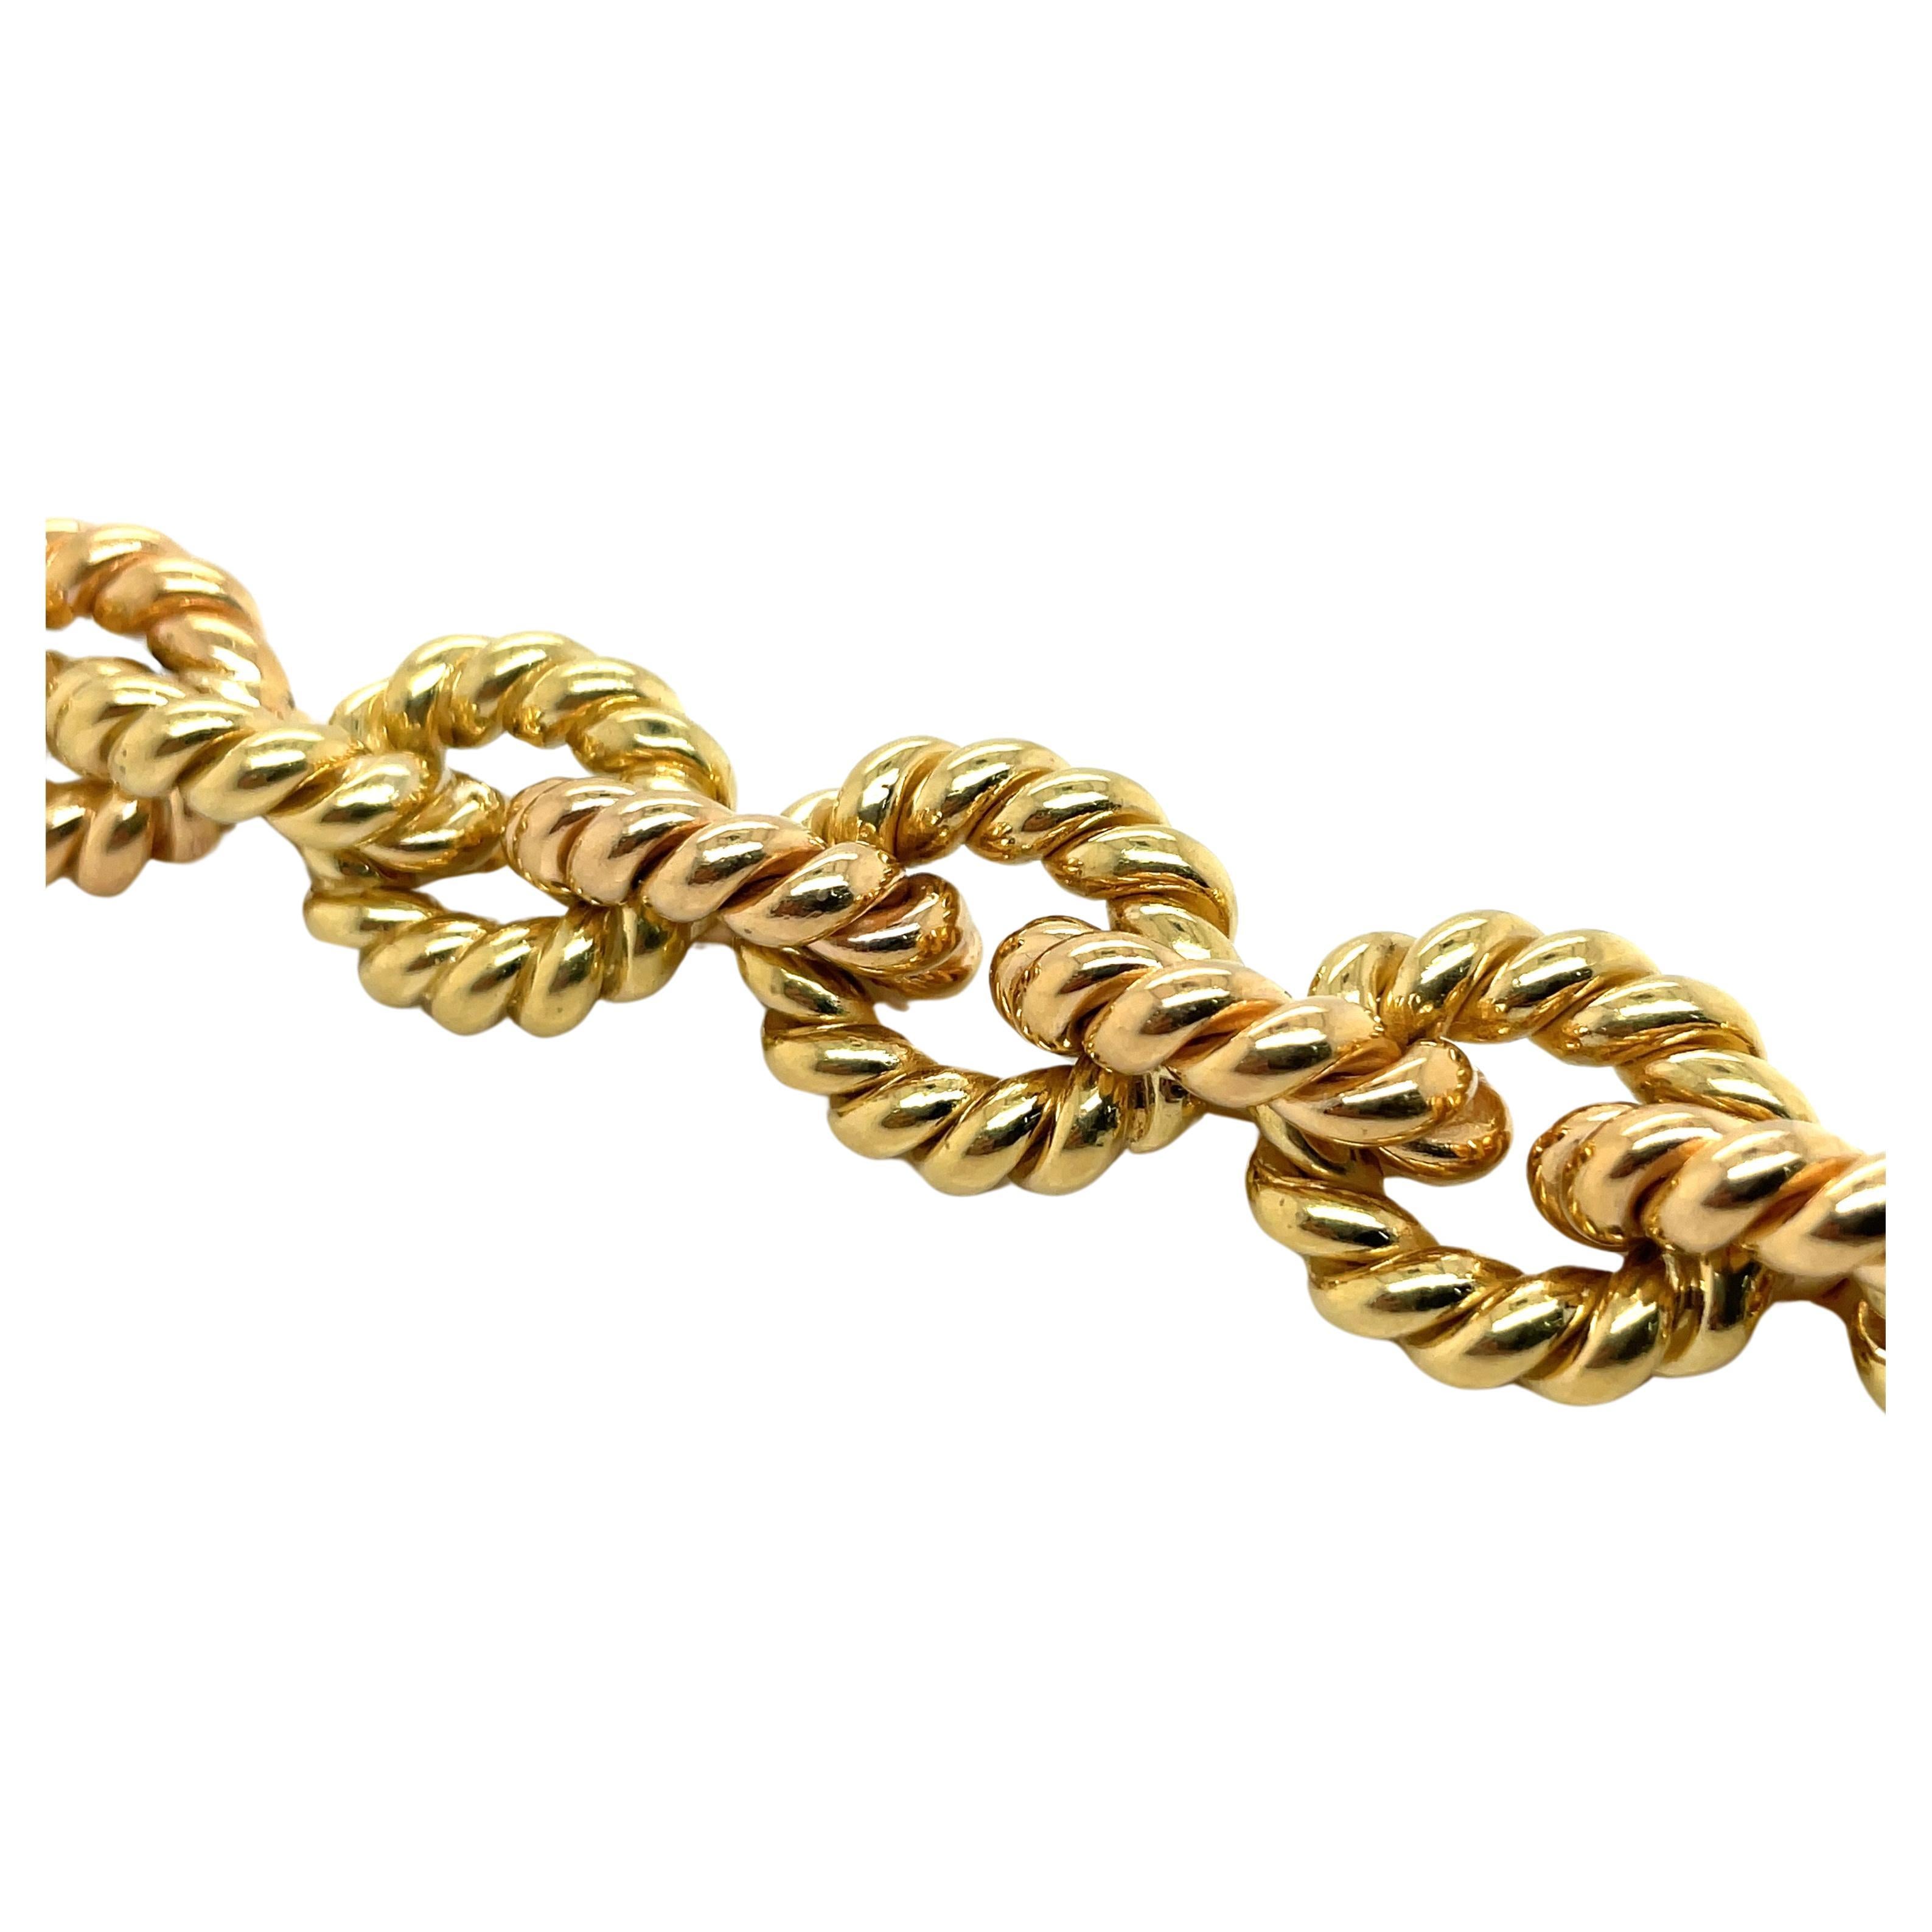 Two Tone Alternating 18 Karat Yellow & Rose Gold Twist Link Bracelet 68 Grams In Excellent Condition For Sale In New York, NY